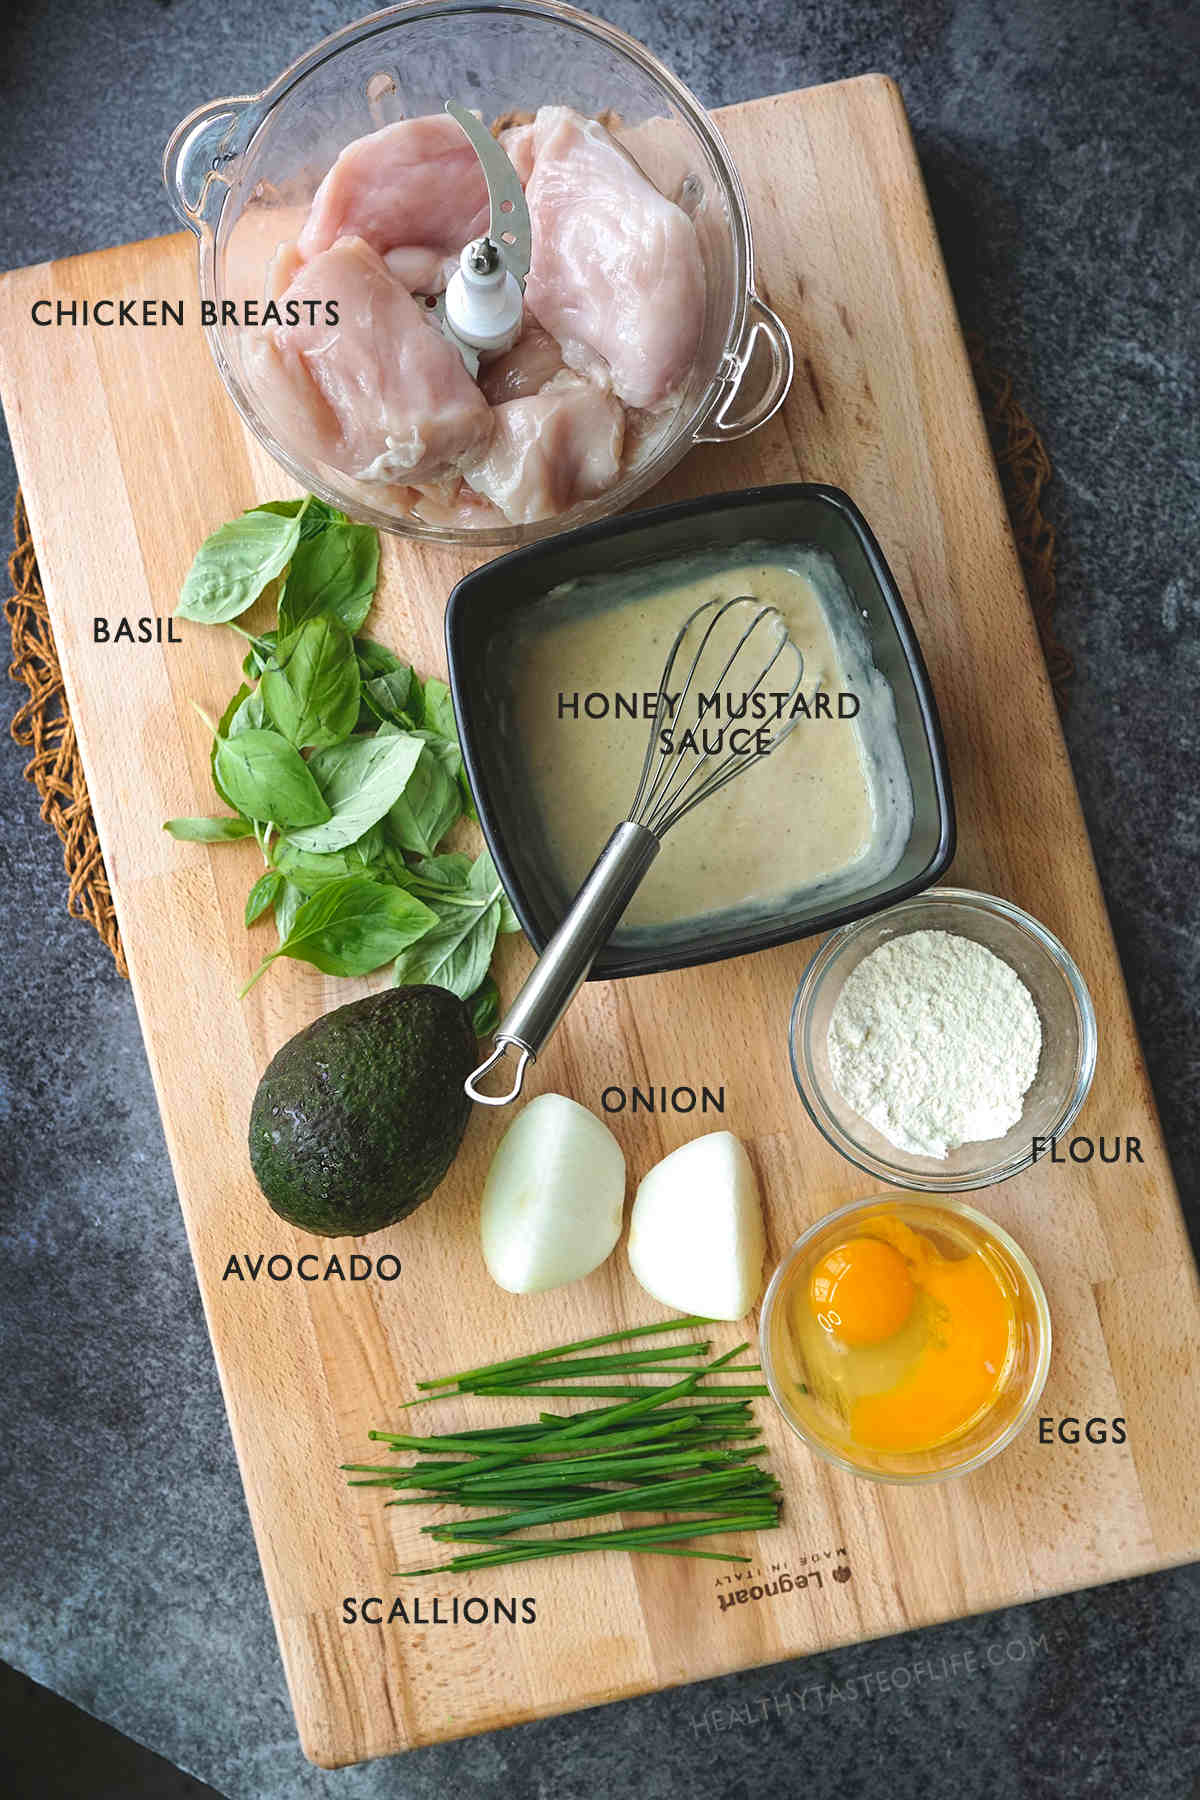 All ingredients necessary for making these healthy chicken fritters without using mayo or cheese.